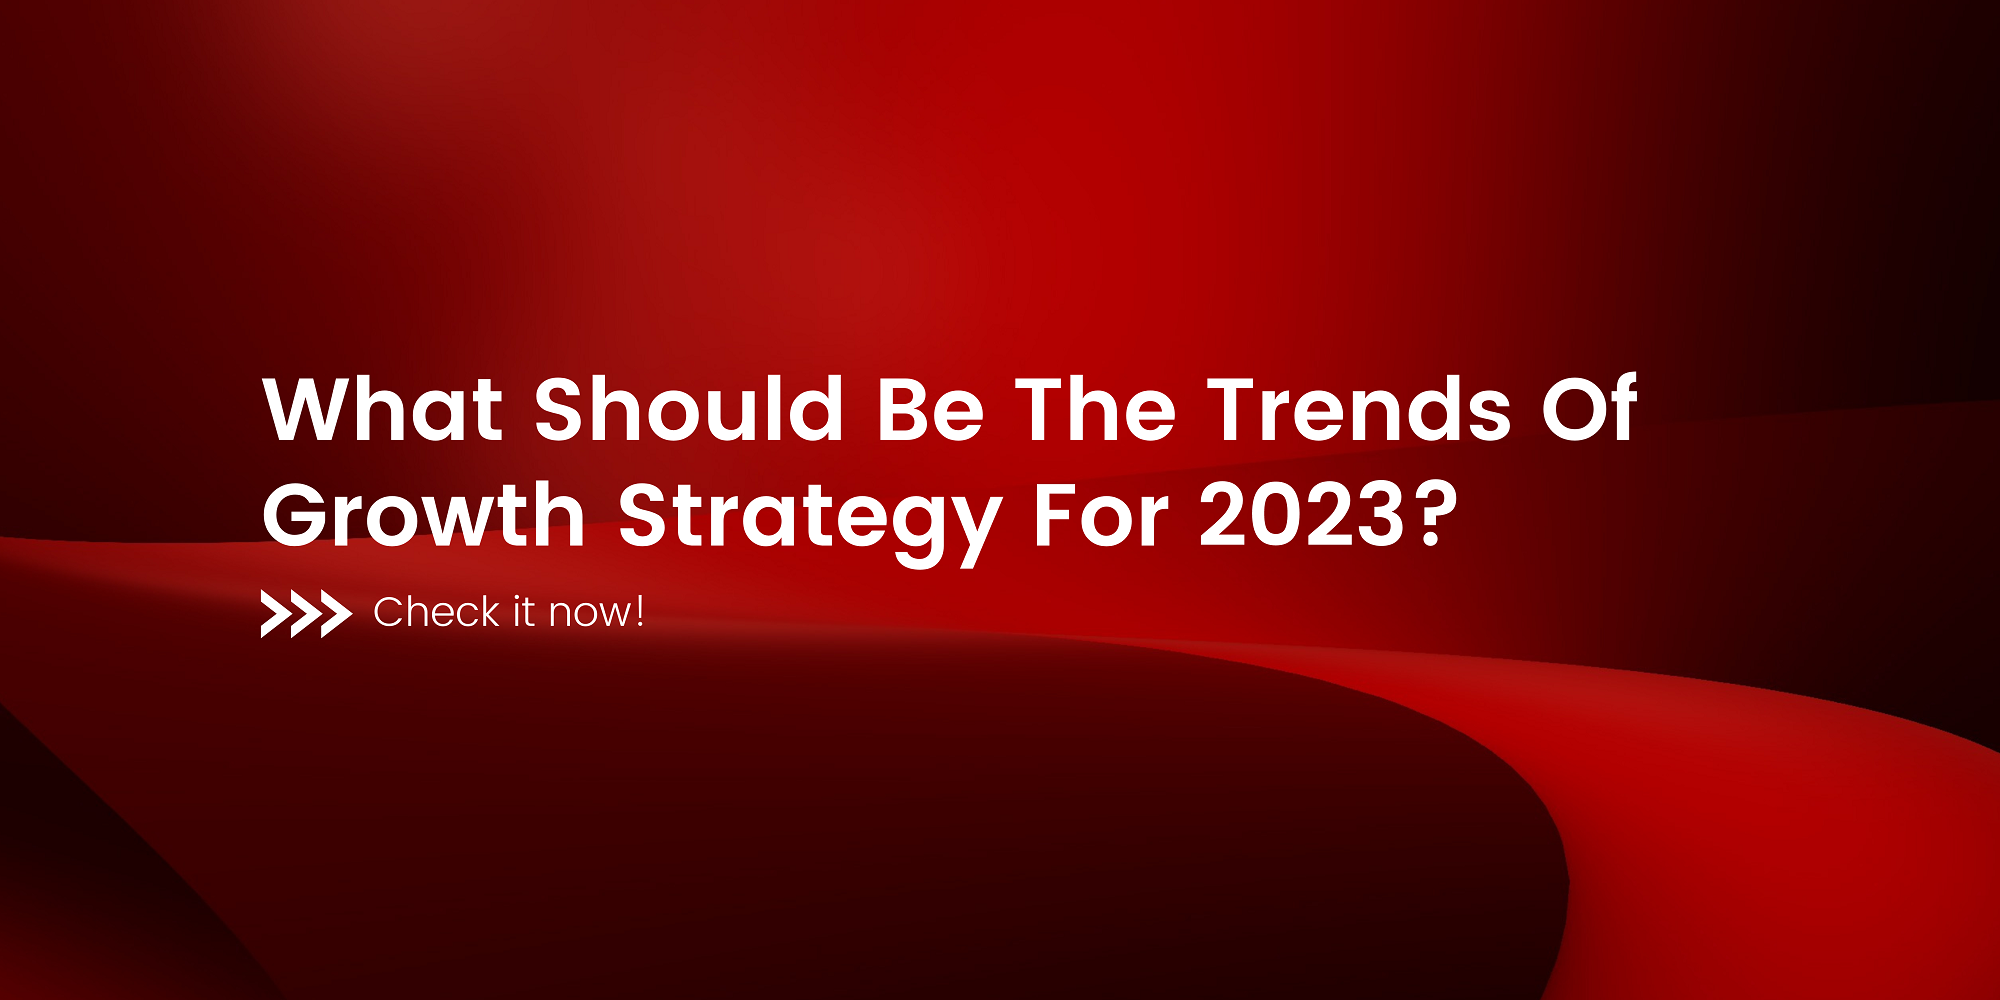 What Should Be The Trends Of Growth Strategy For 2023